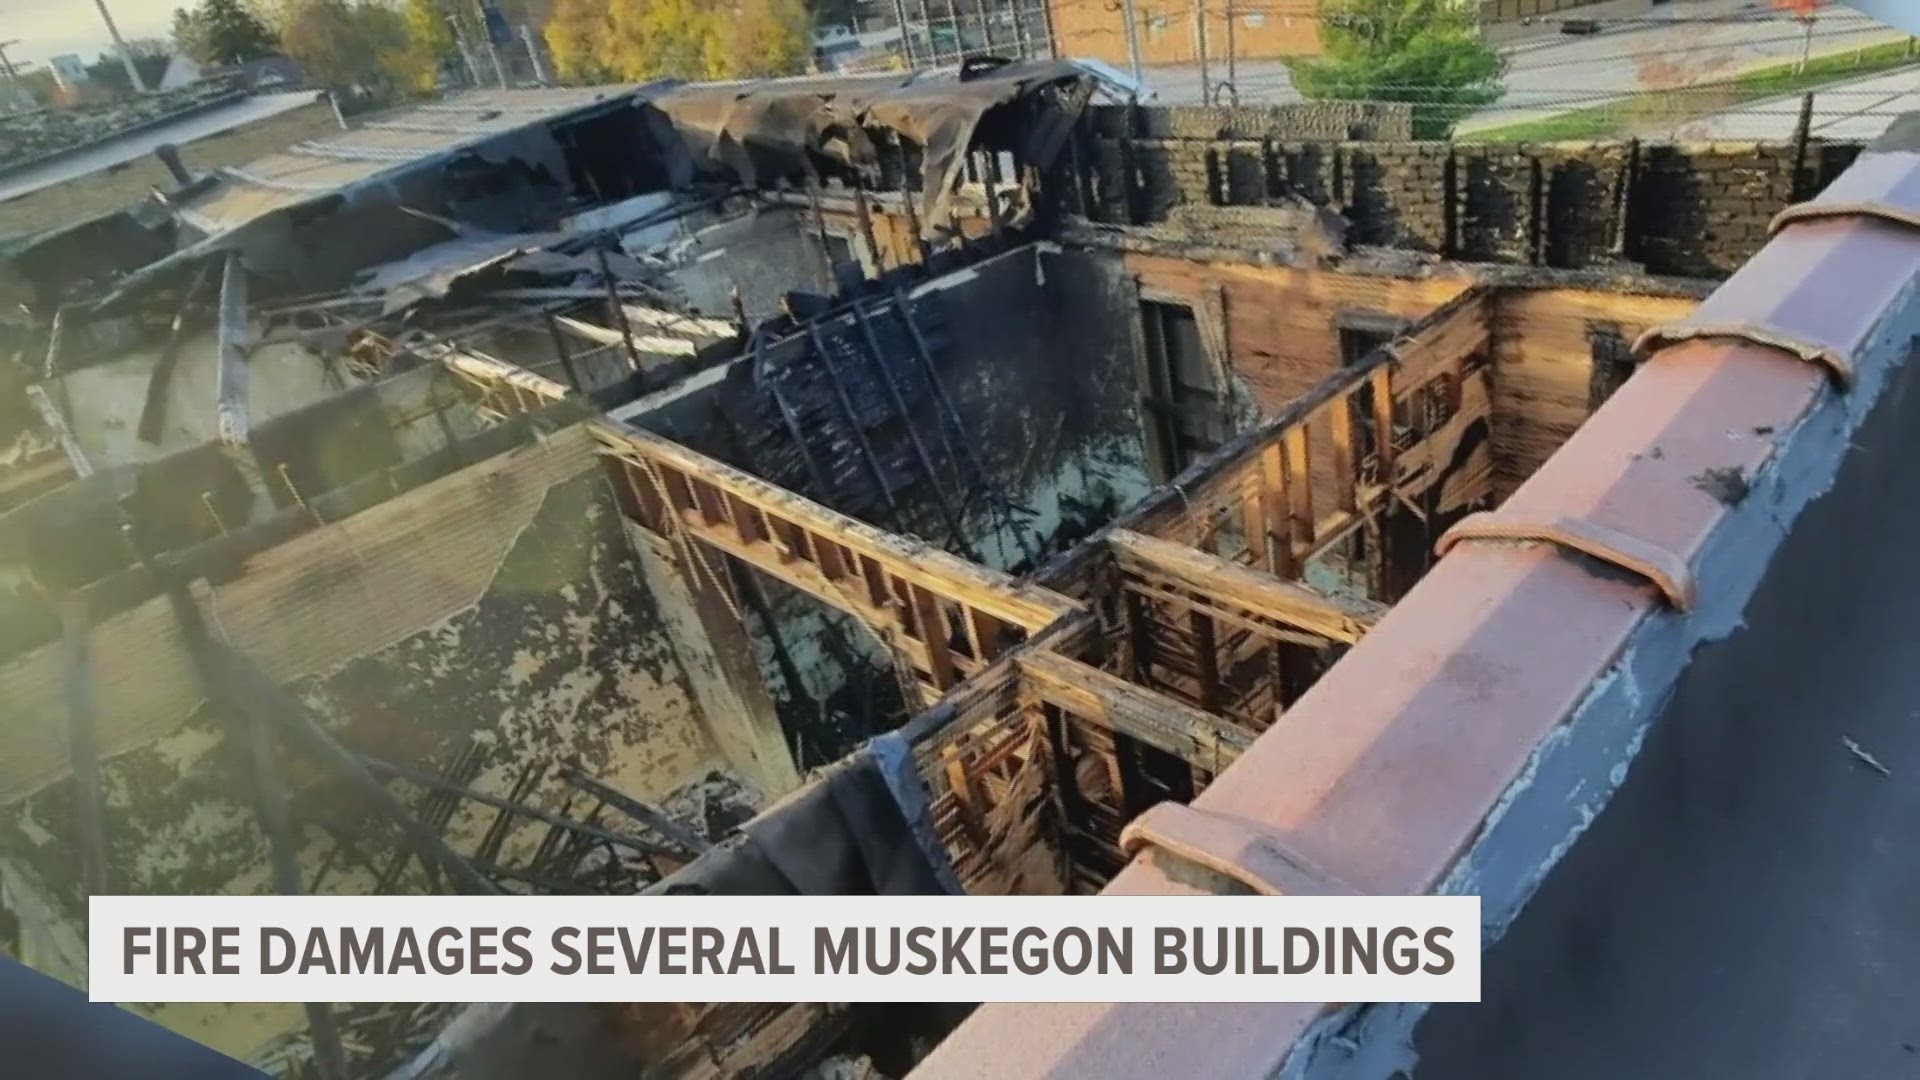 Muskegon fire officials gave us an answer as to what ignited the flames.